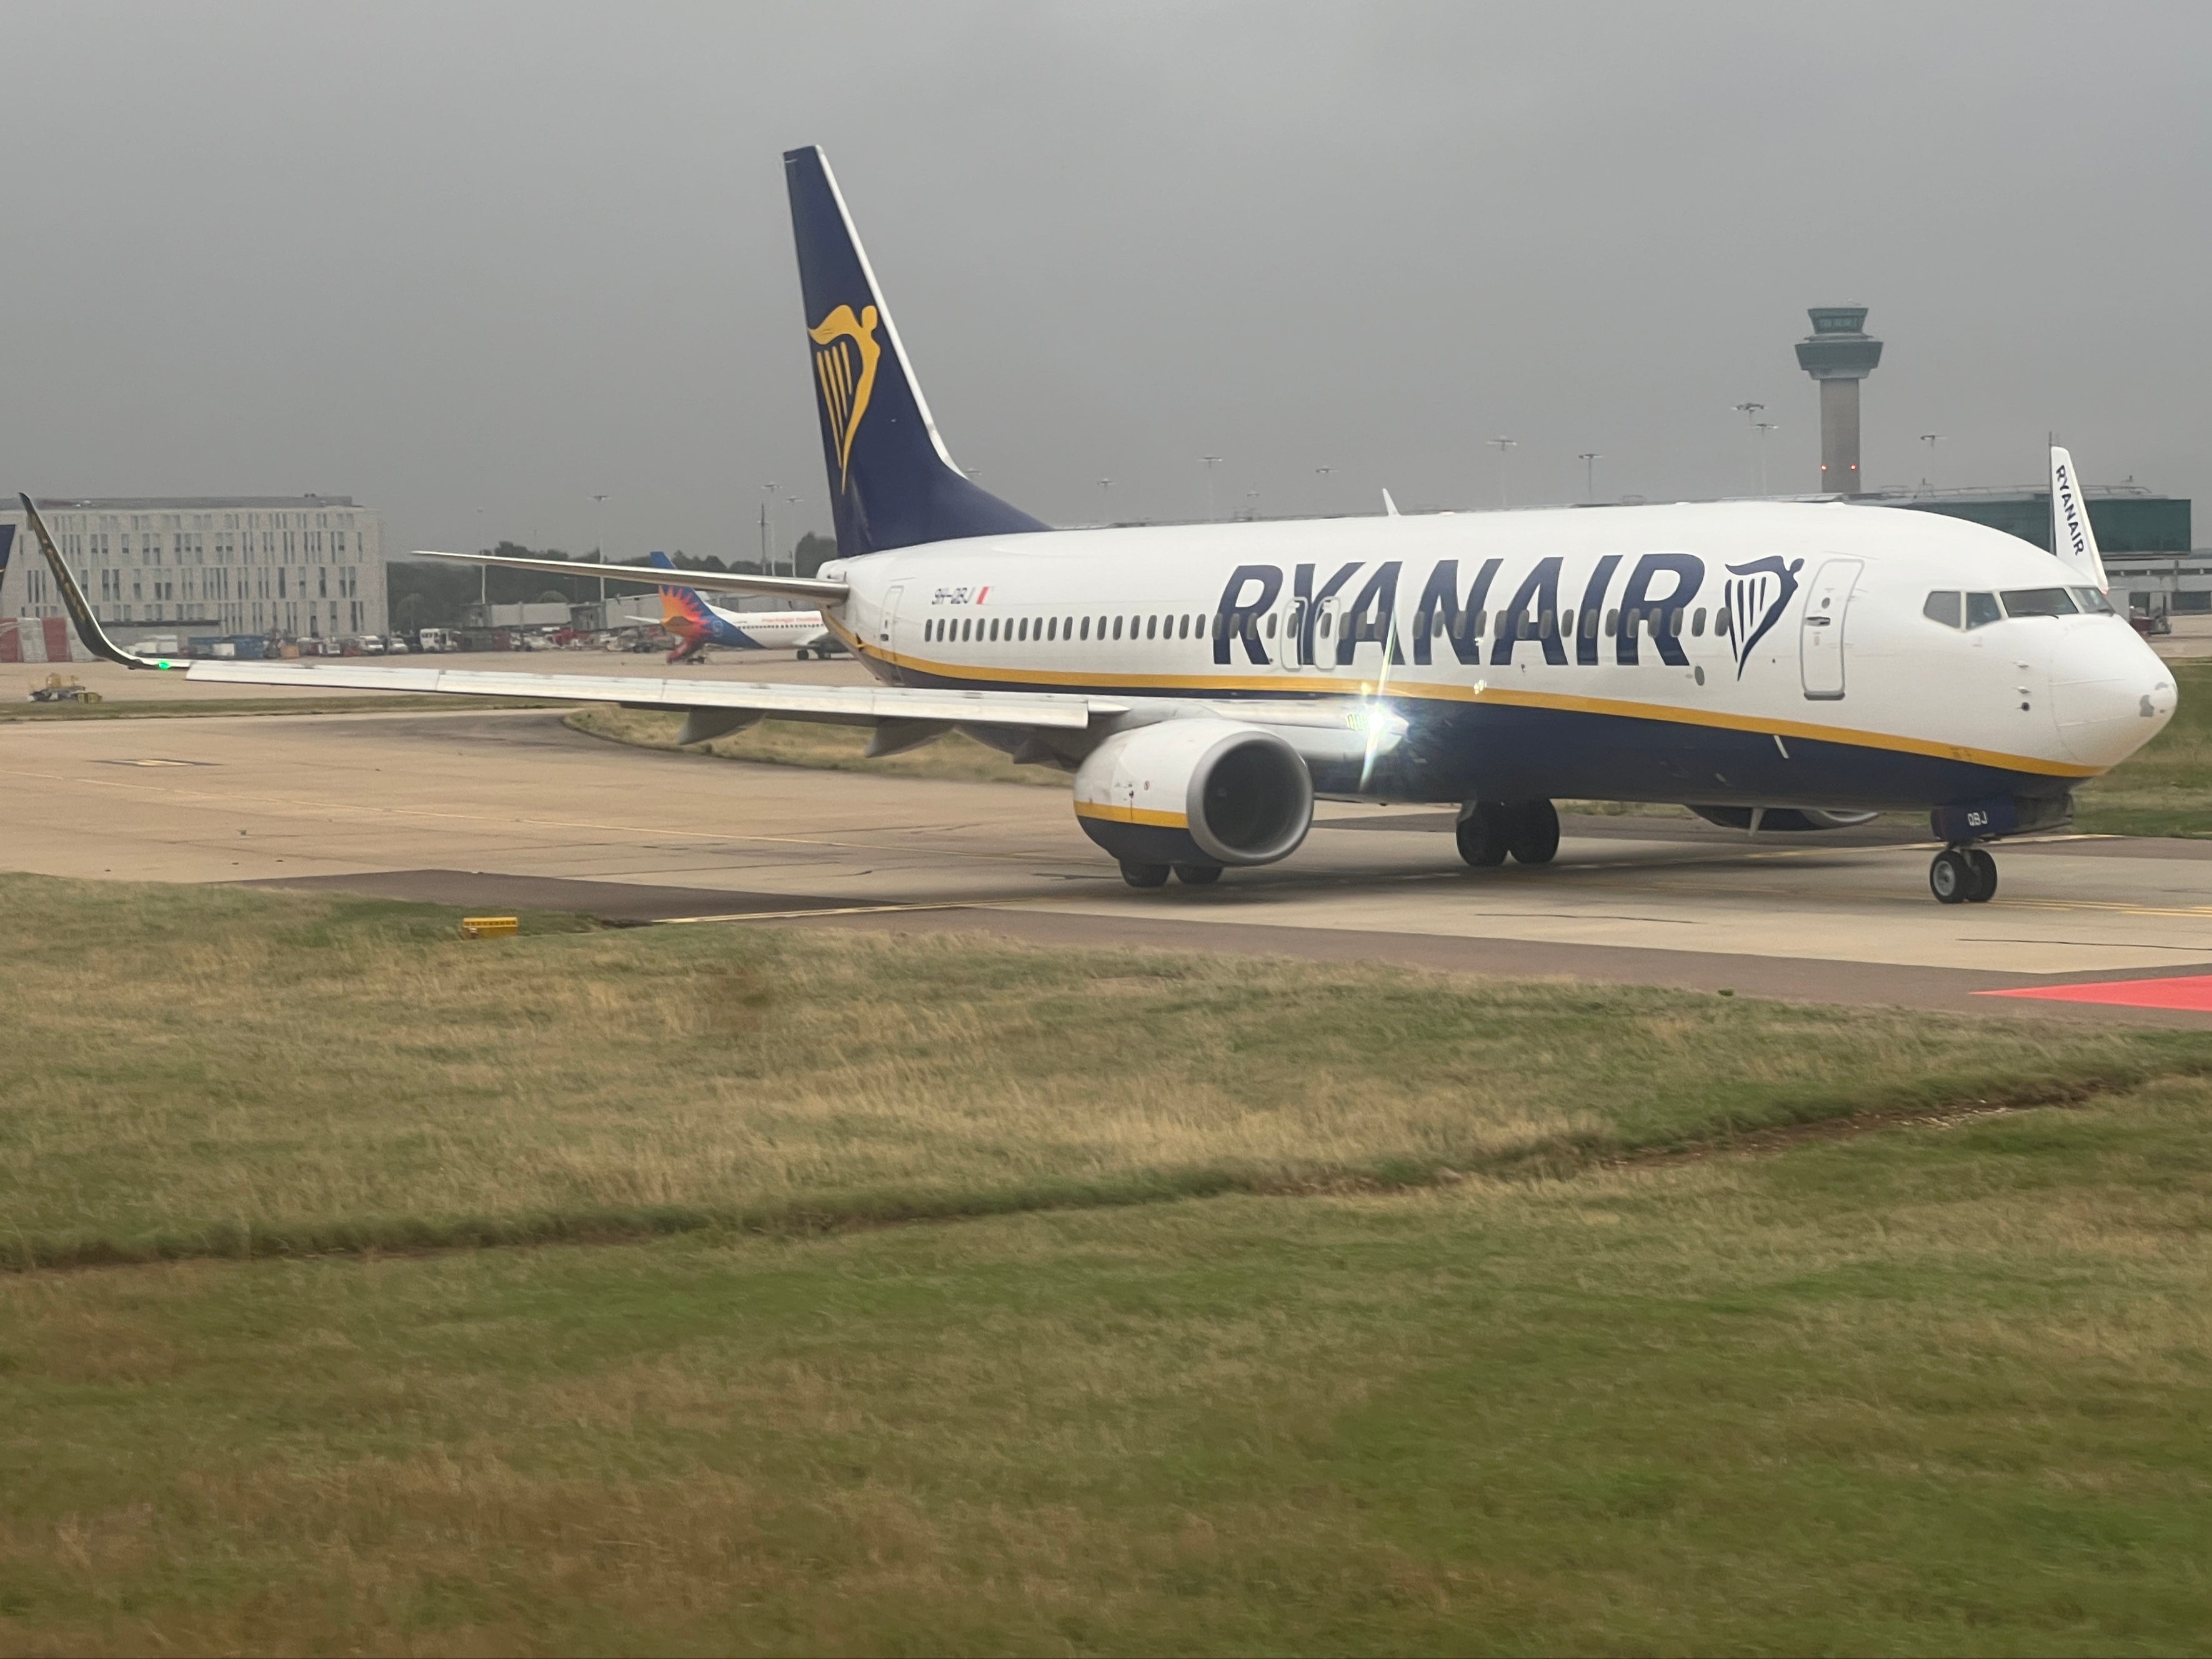 Going places: Ryanair Boeing 737 at its main base, London Stansted airport